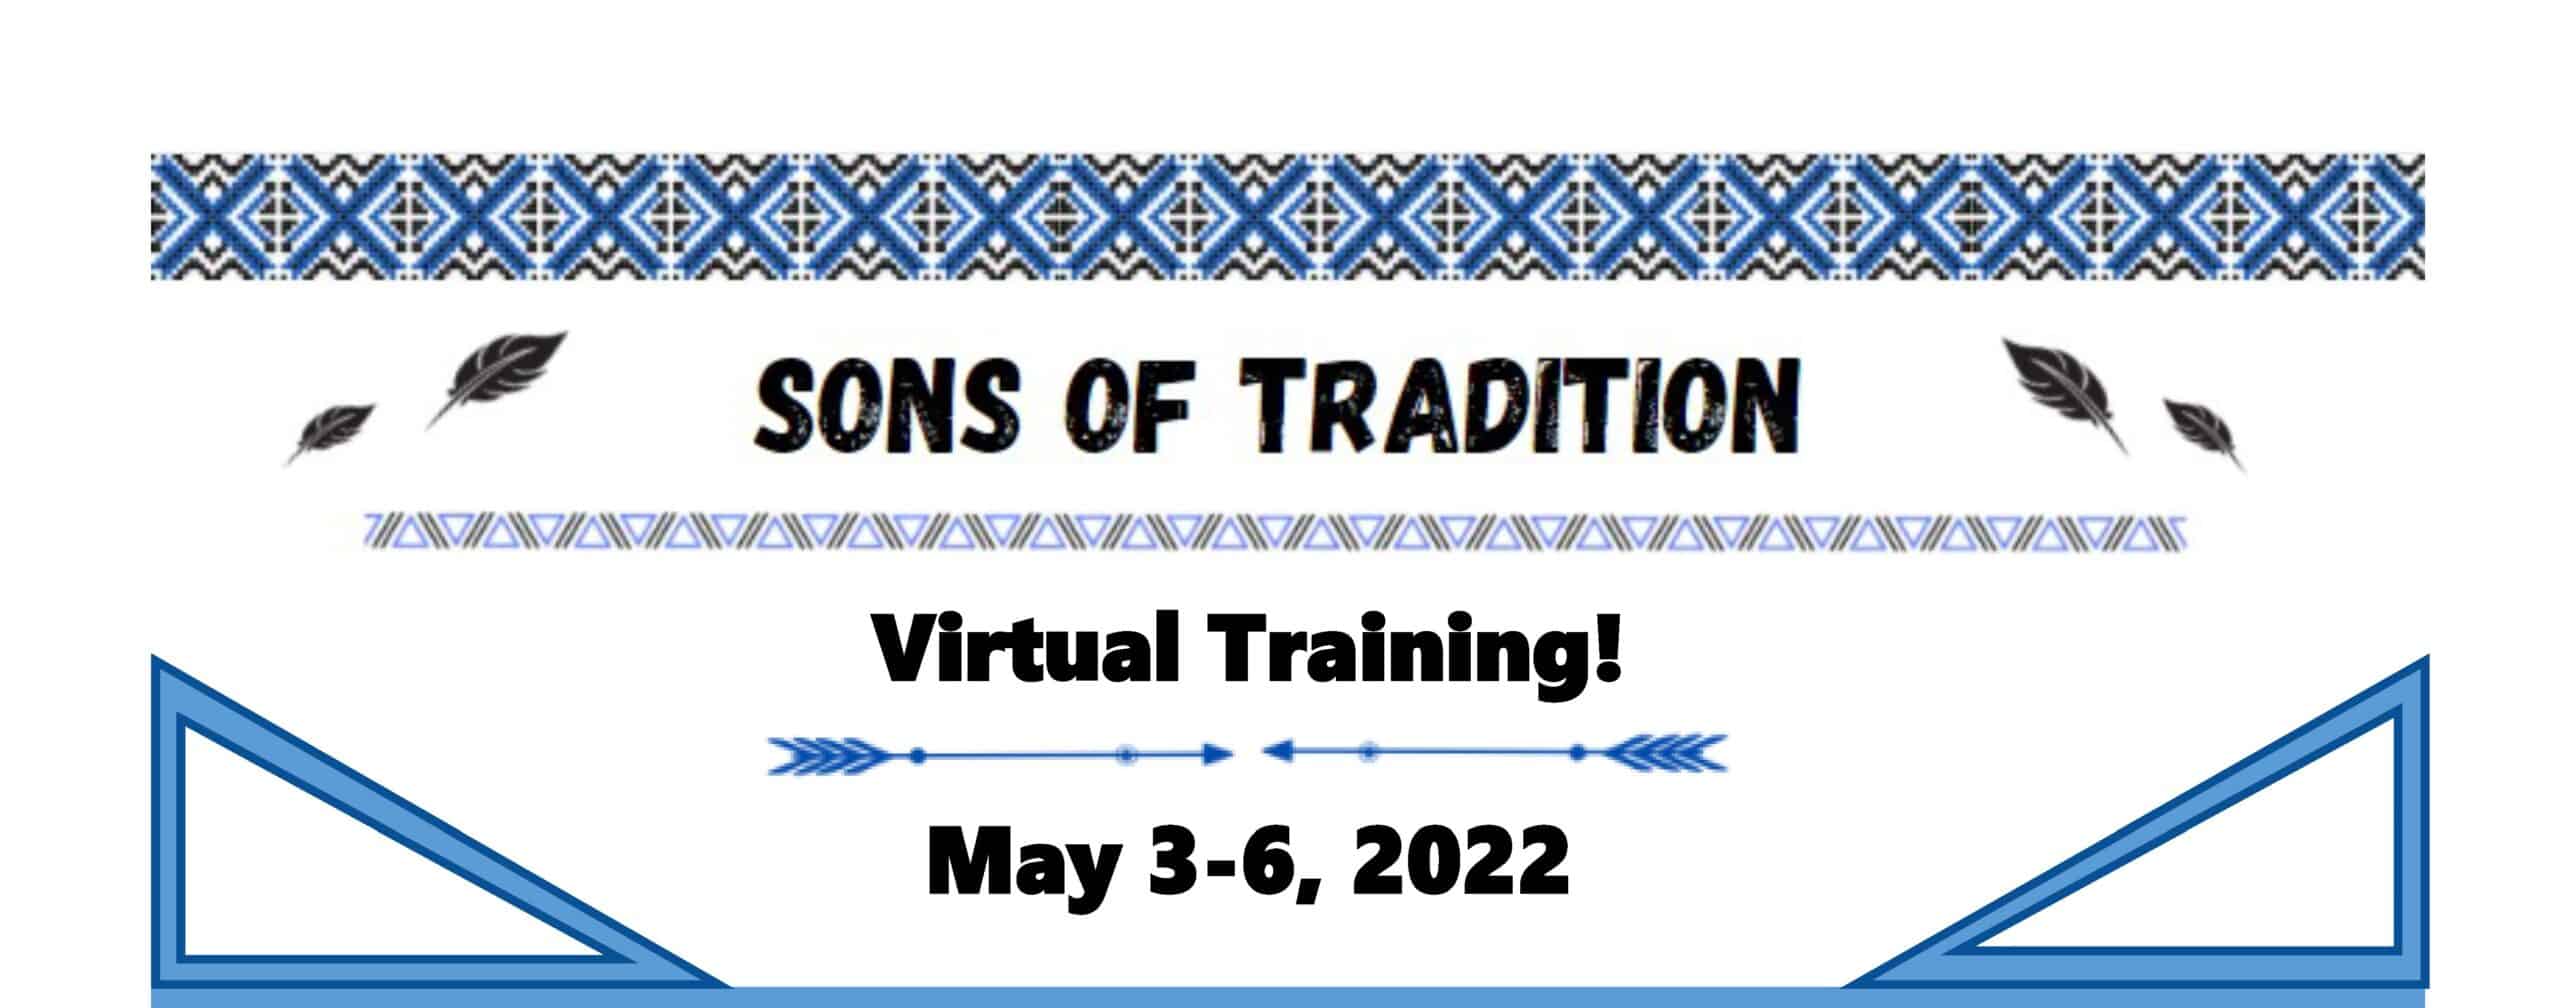 Sons of Tradition (December 13-16, 2022) – 4 Day Virtual Zoom Training